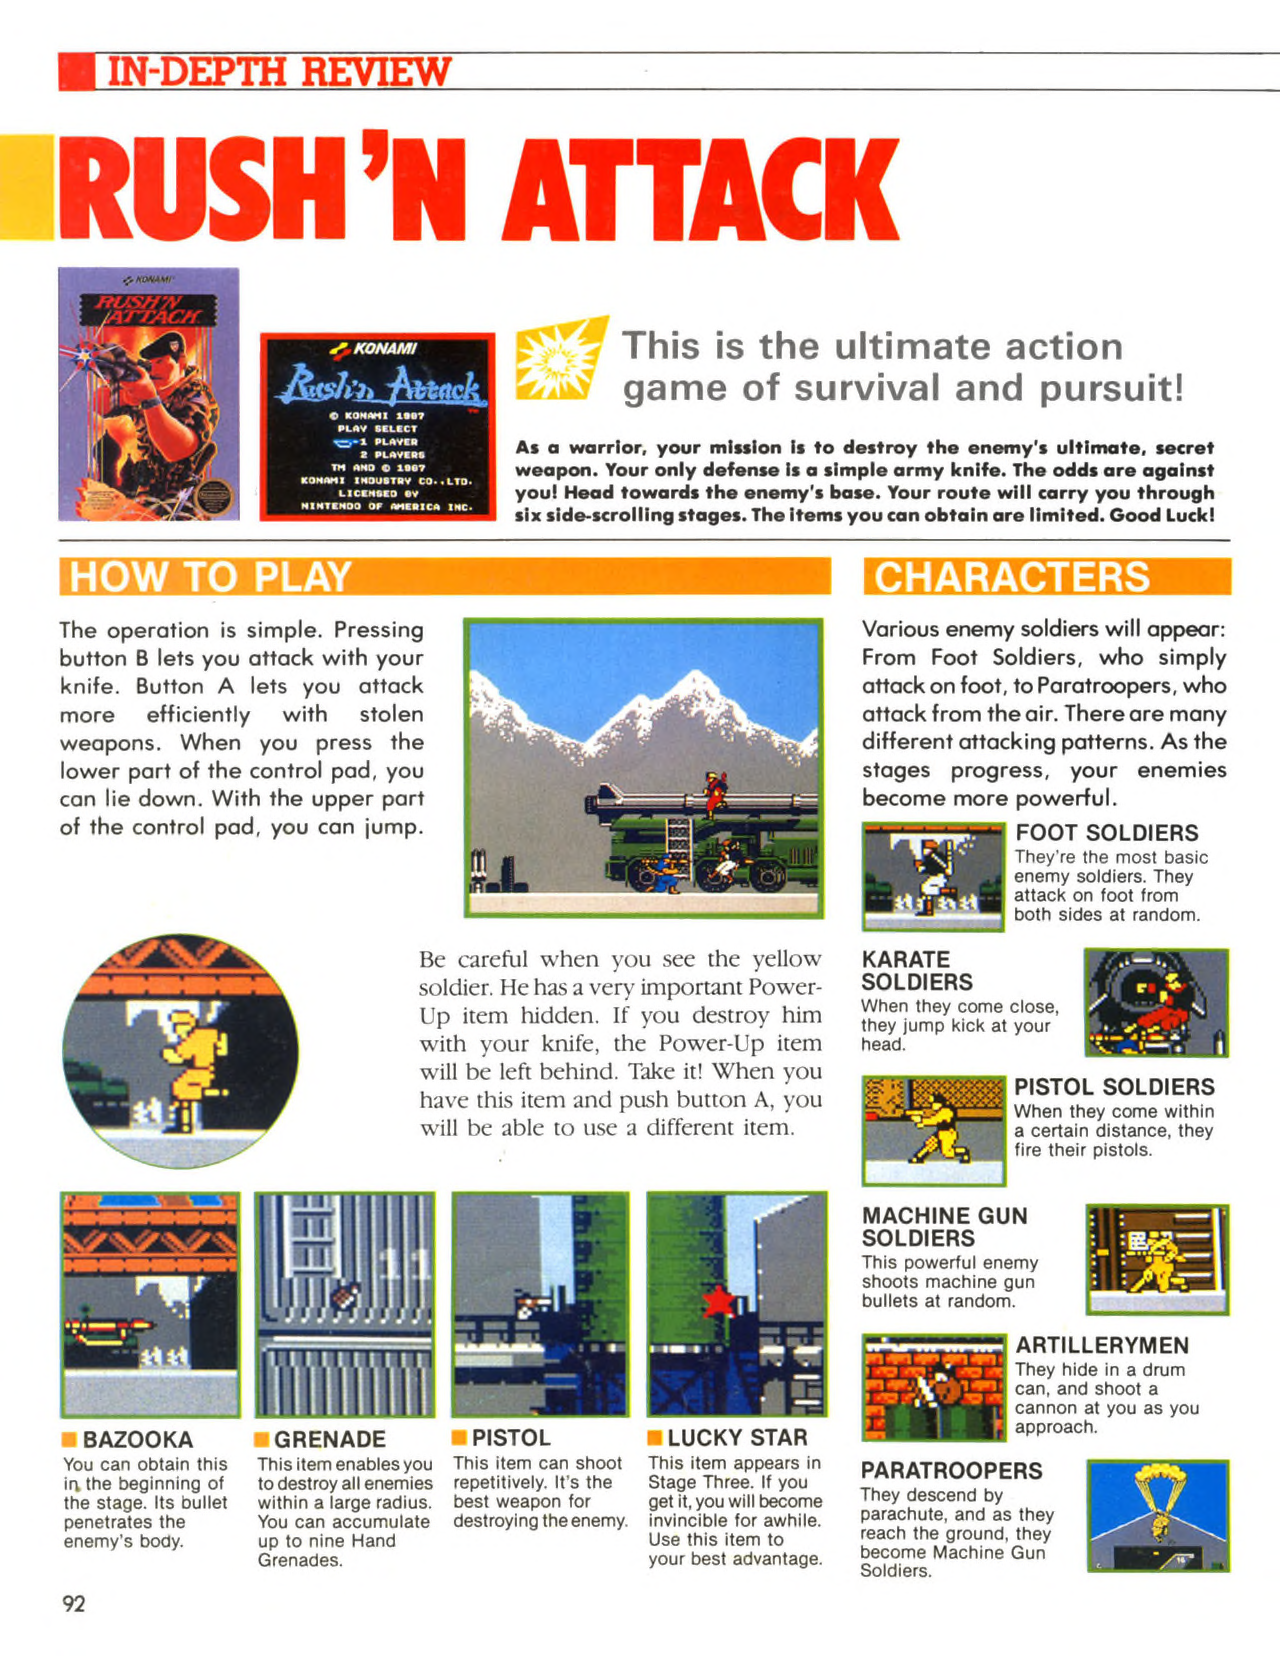 Let's Play Russian Attack Arcade Game (Rush 'N Attack) 